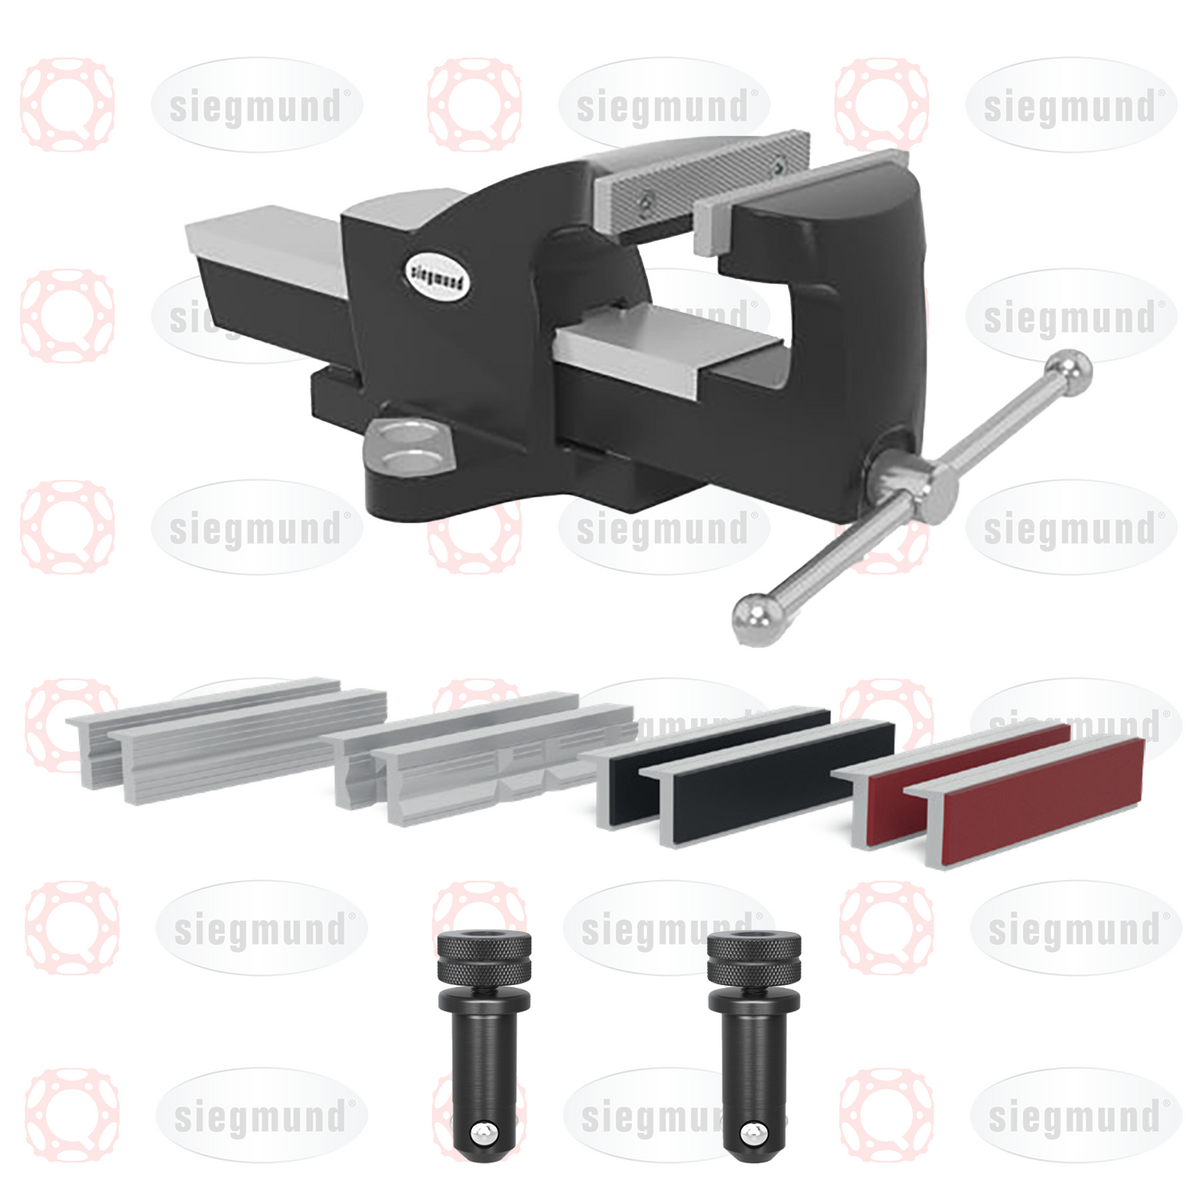 2-284330: Bench Vise 150 for System 28 with 150 Vise Jaw Cover Set